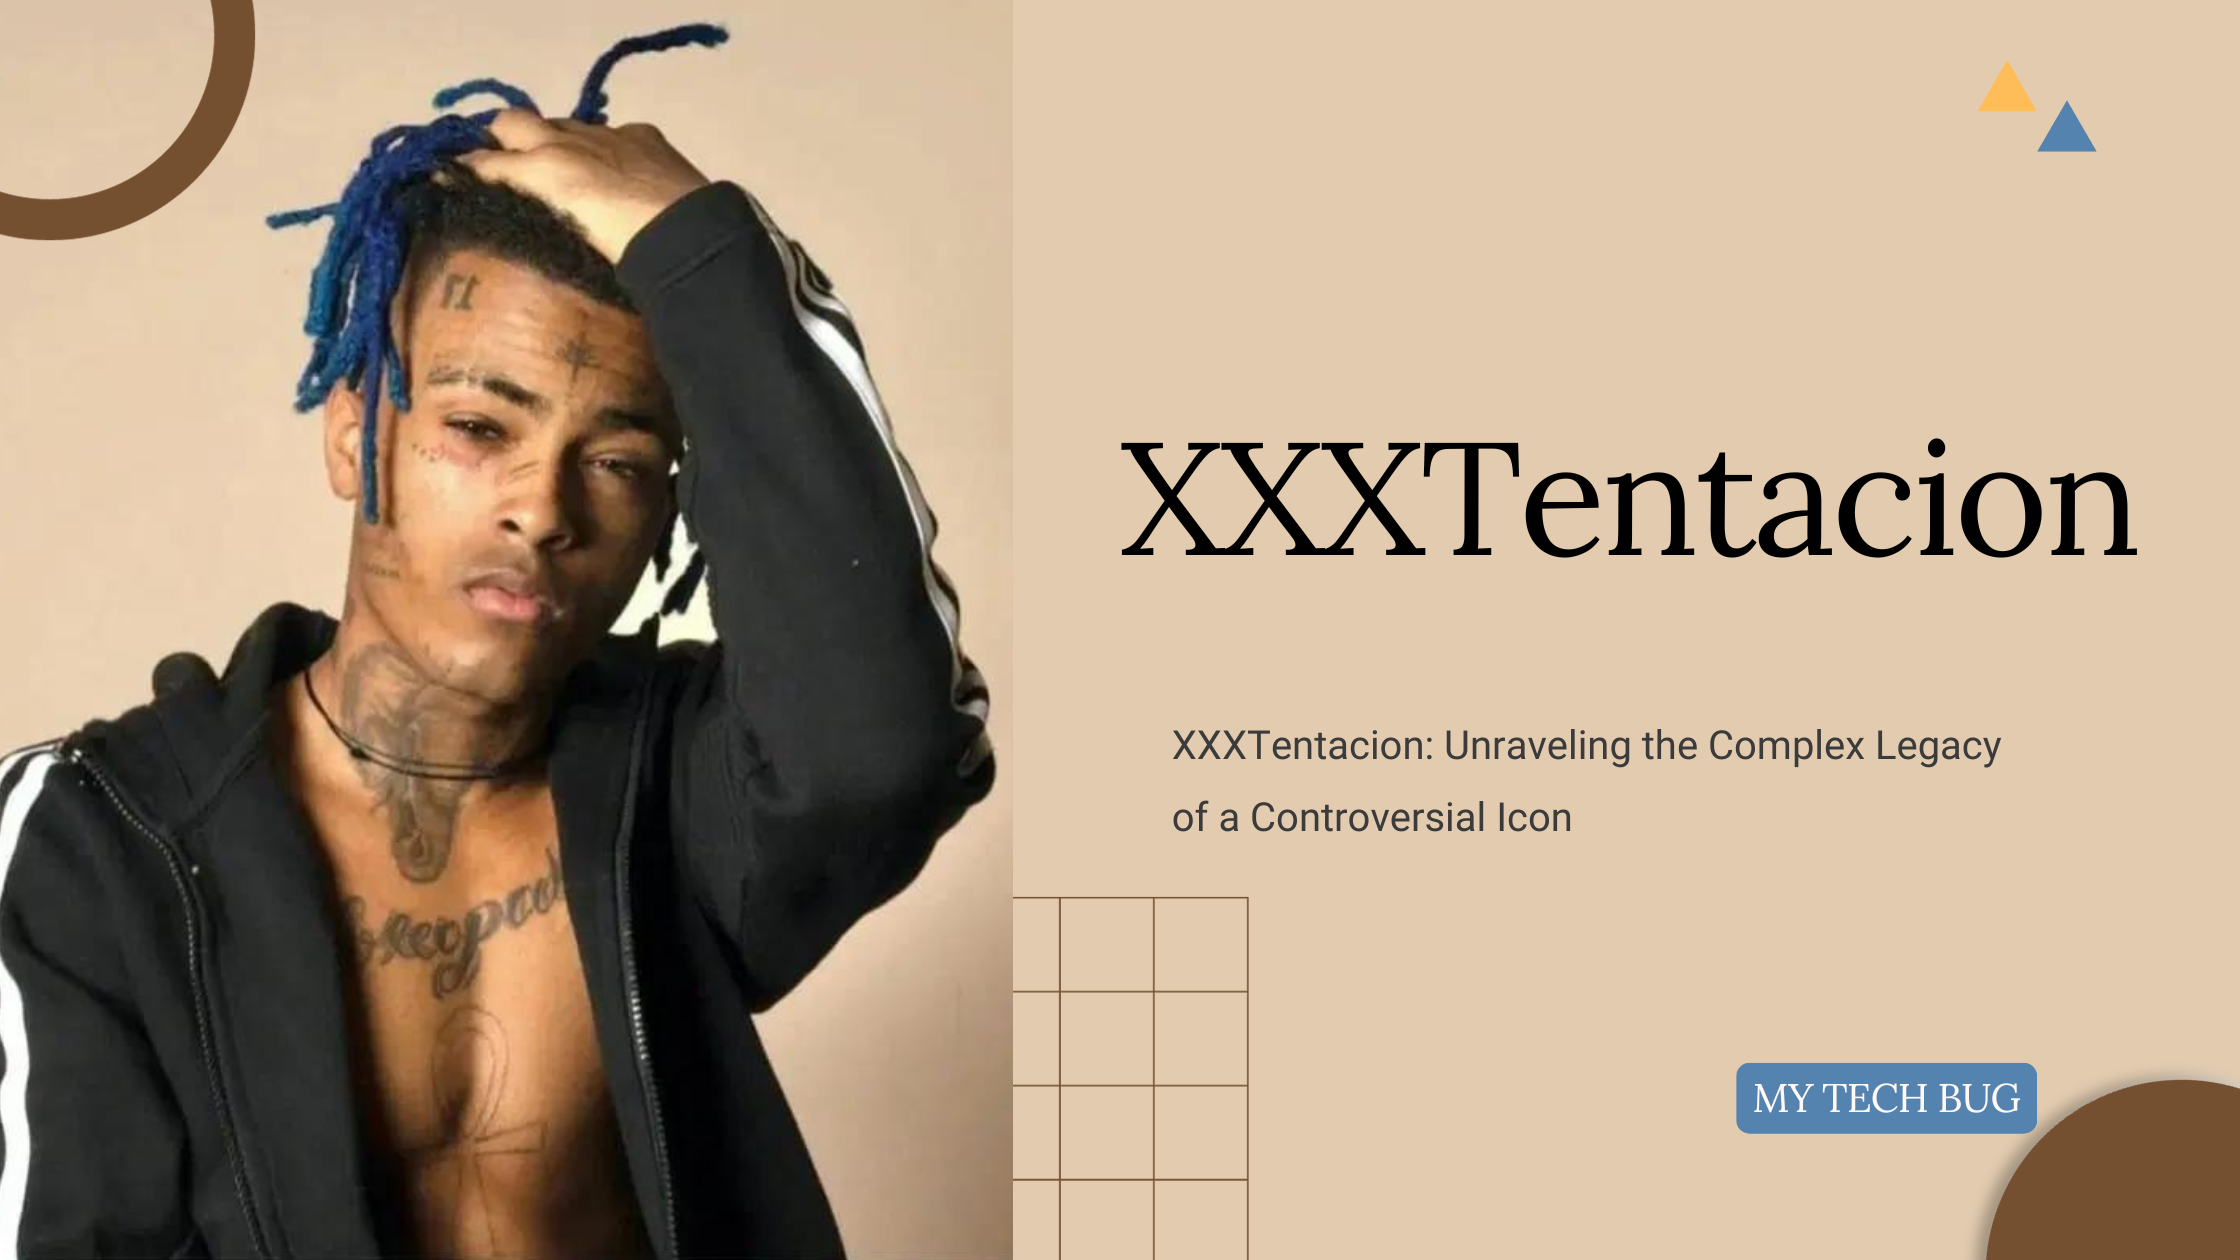 XXXTentacion: Unraveling the Complex Legacy of a Controversial Icon